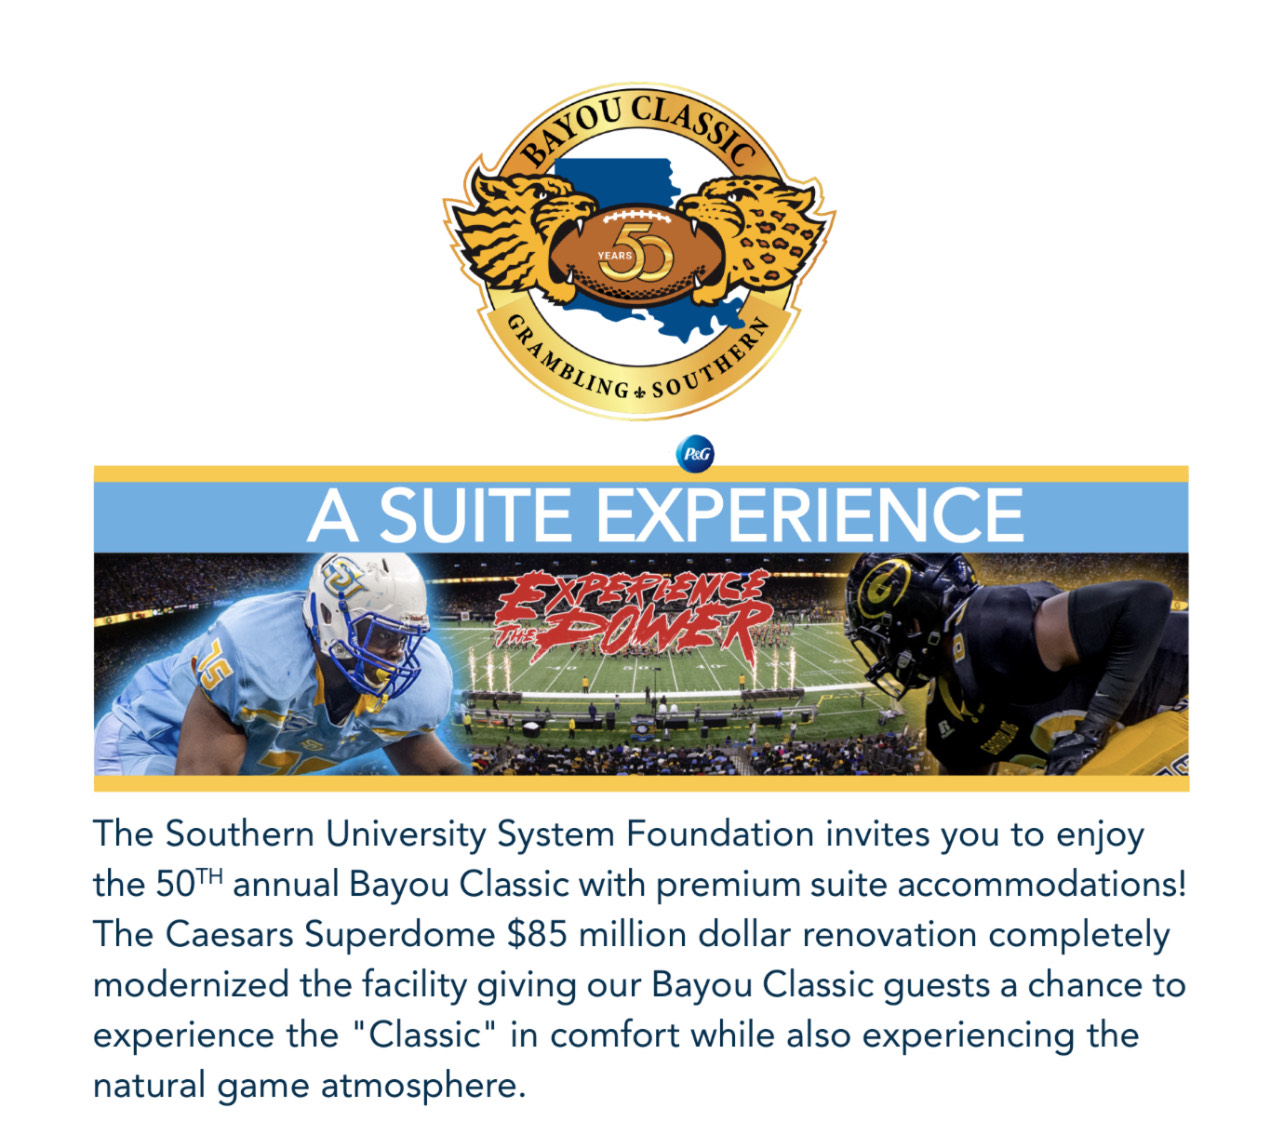 The Southern University System Foundation Invites you to enjoy the 50th annual Bayou Classic with premium suite accommadations! The Caesar Superdome $85 million dollar renovation completely modernized the facility giving our Bayour Classic guests a chance to expereince the "Classic" in comfort while also experiencing the natural game atmosphere.